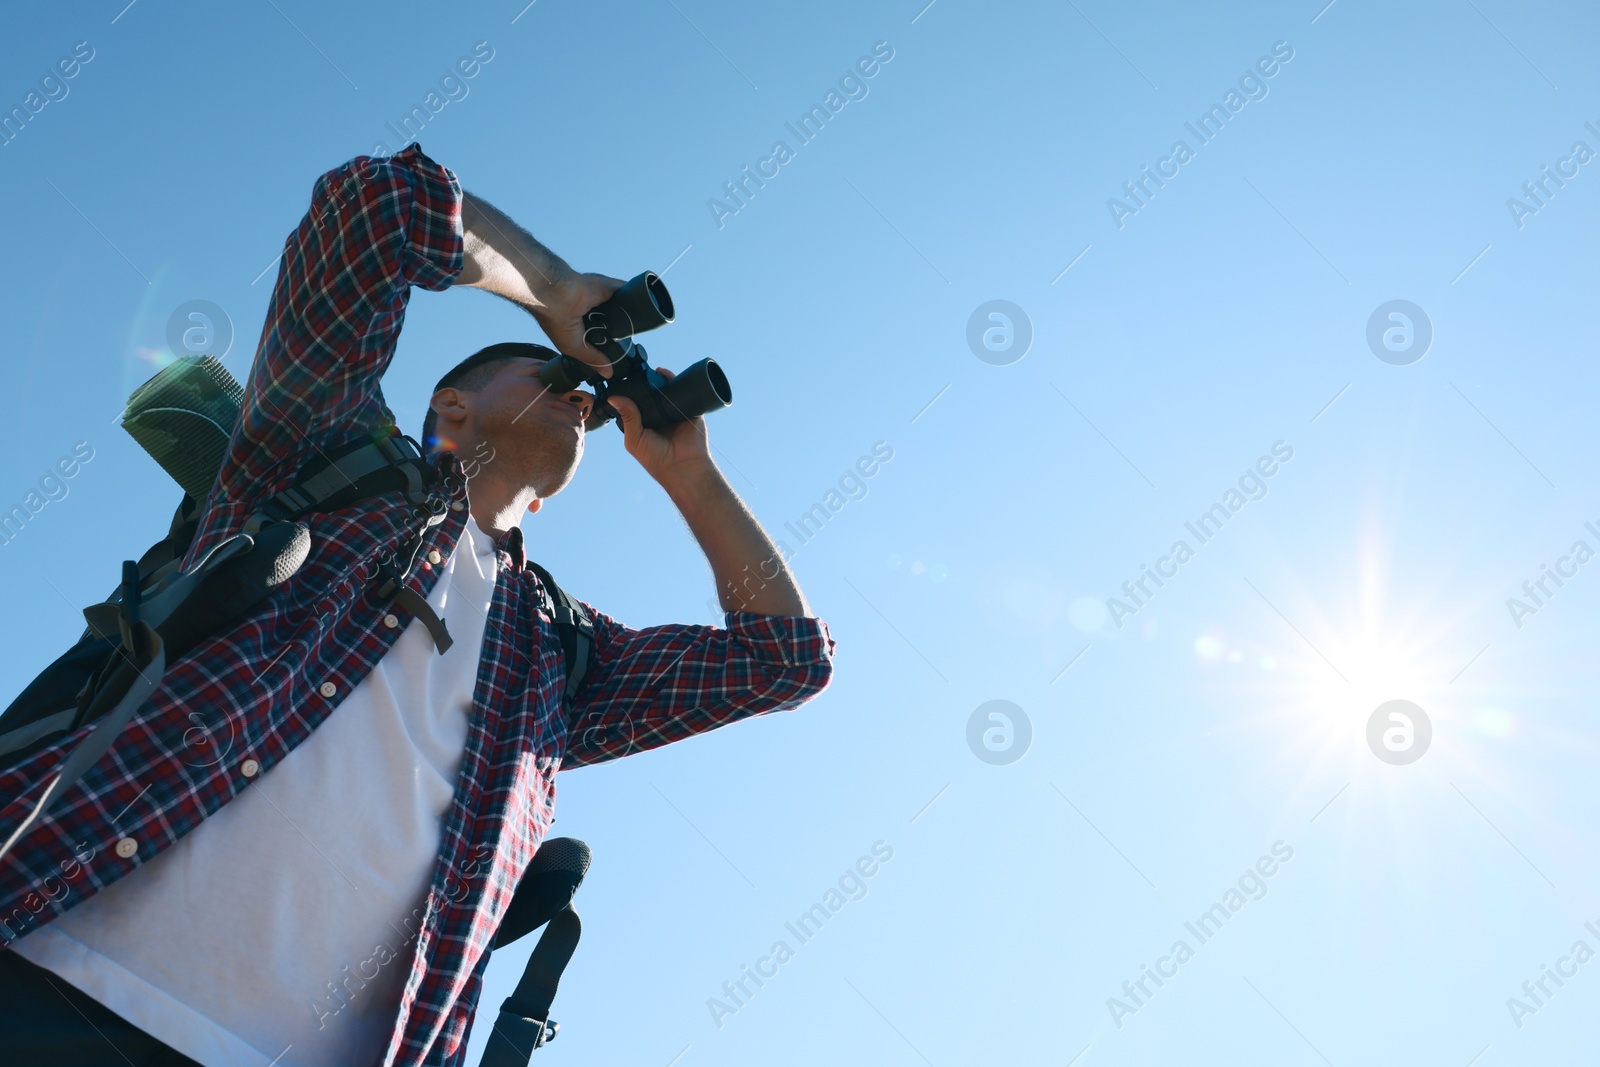 Photo of Tourist with hiking equipment looking through binoculars outdoors on sunny day, low angle view